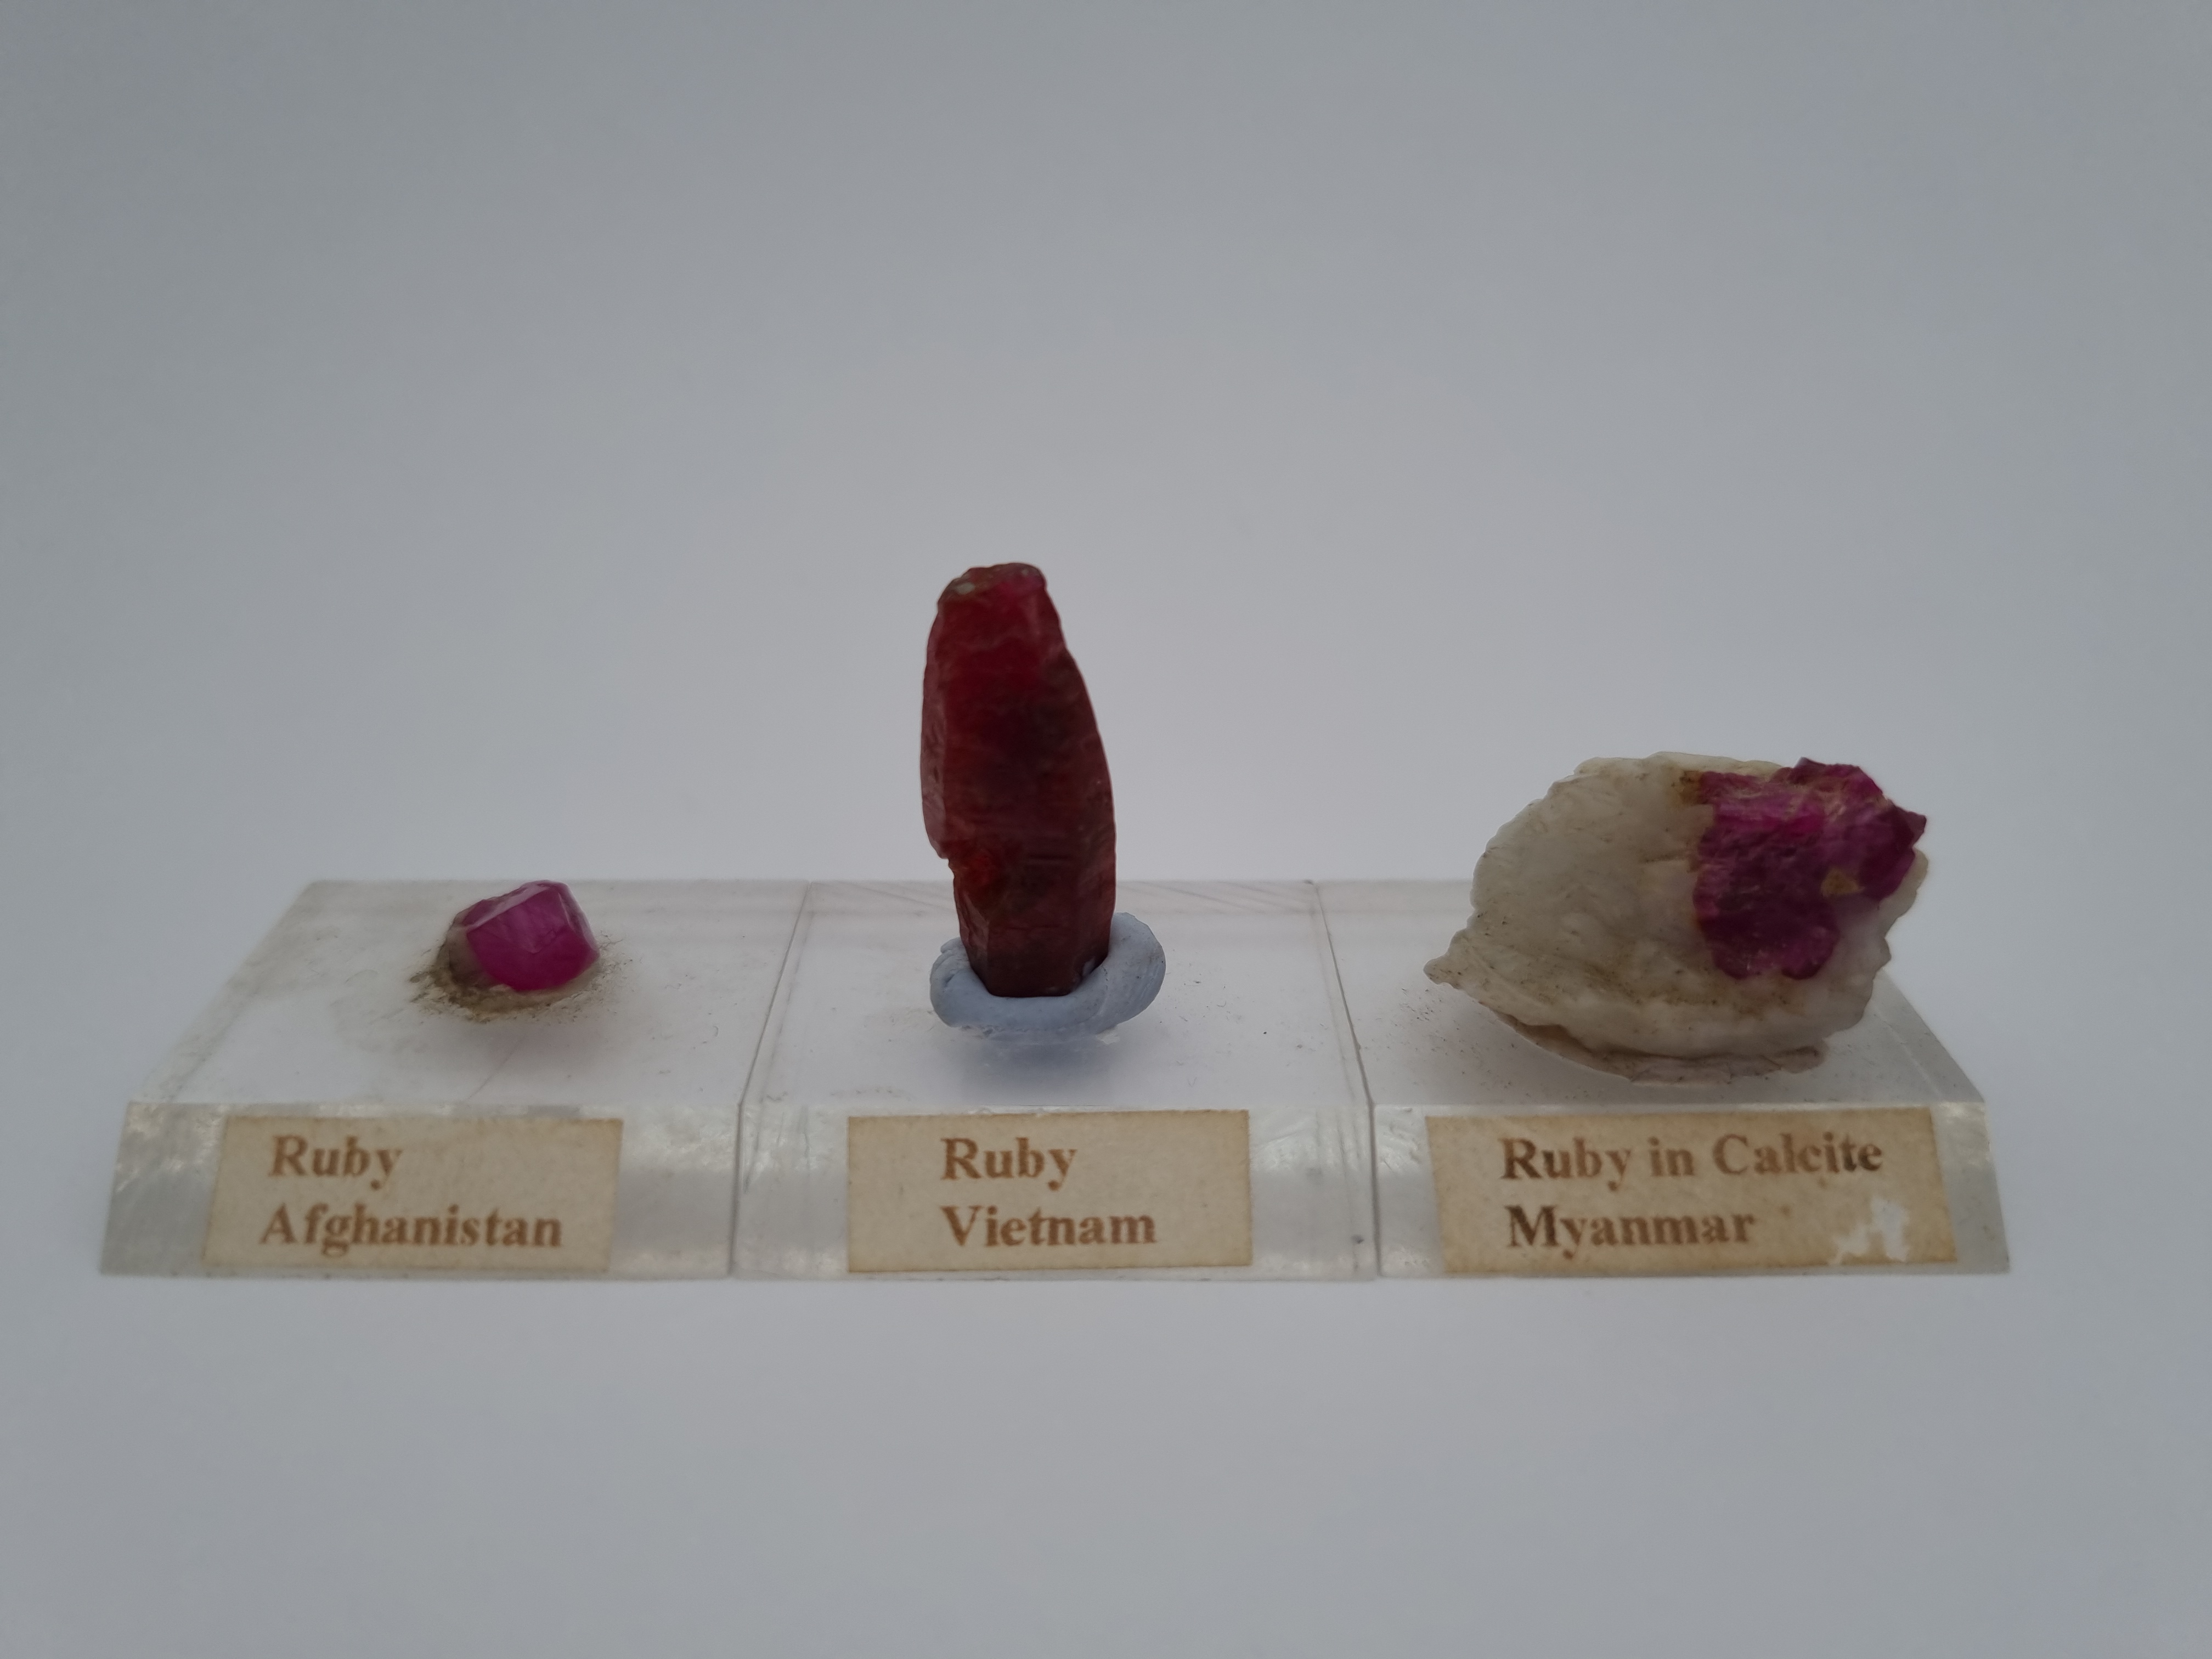 How to Identify 10 Red and Pink Minerals